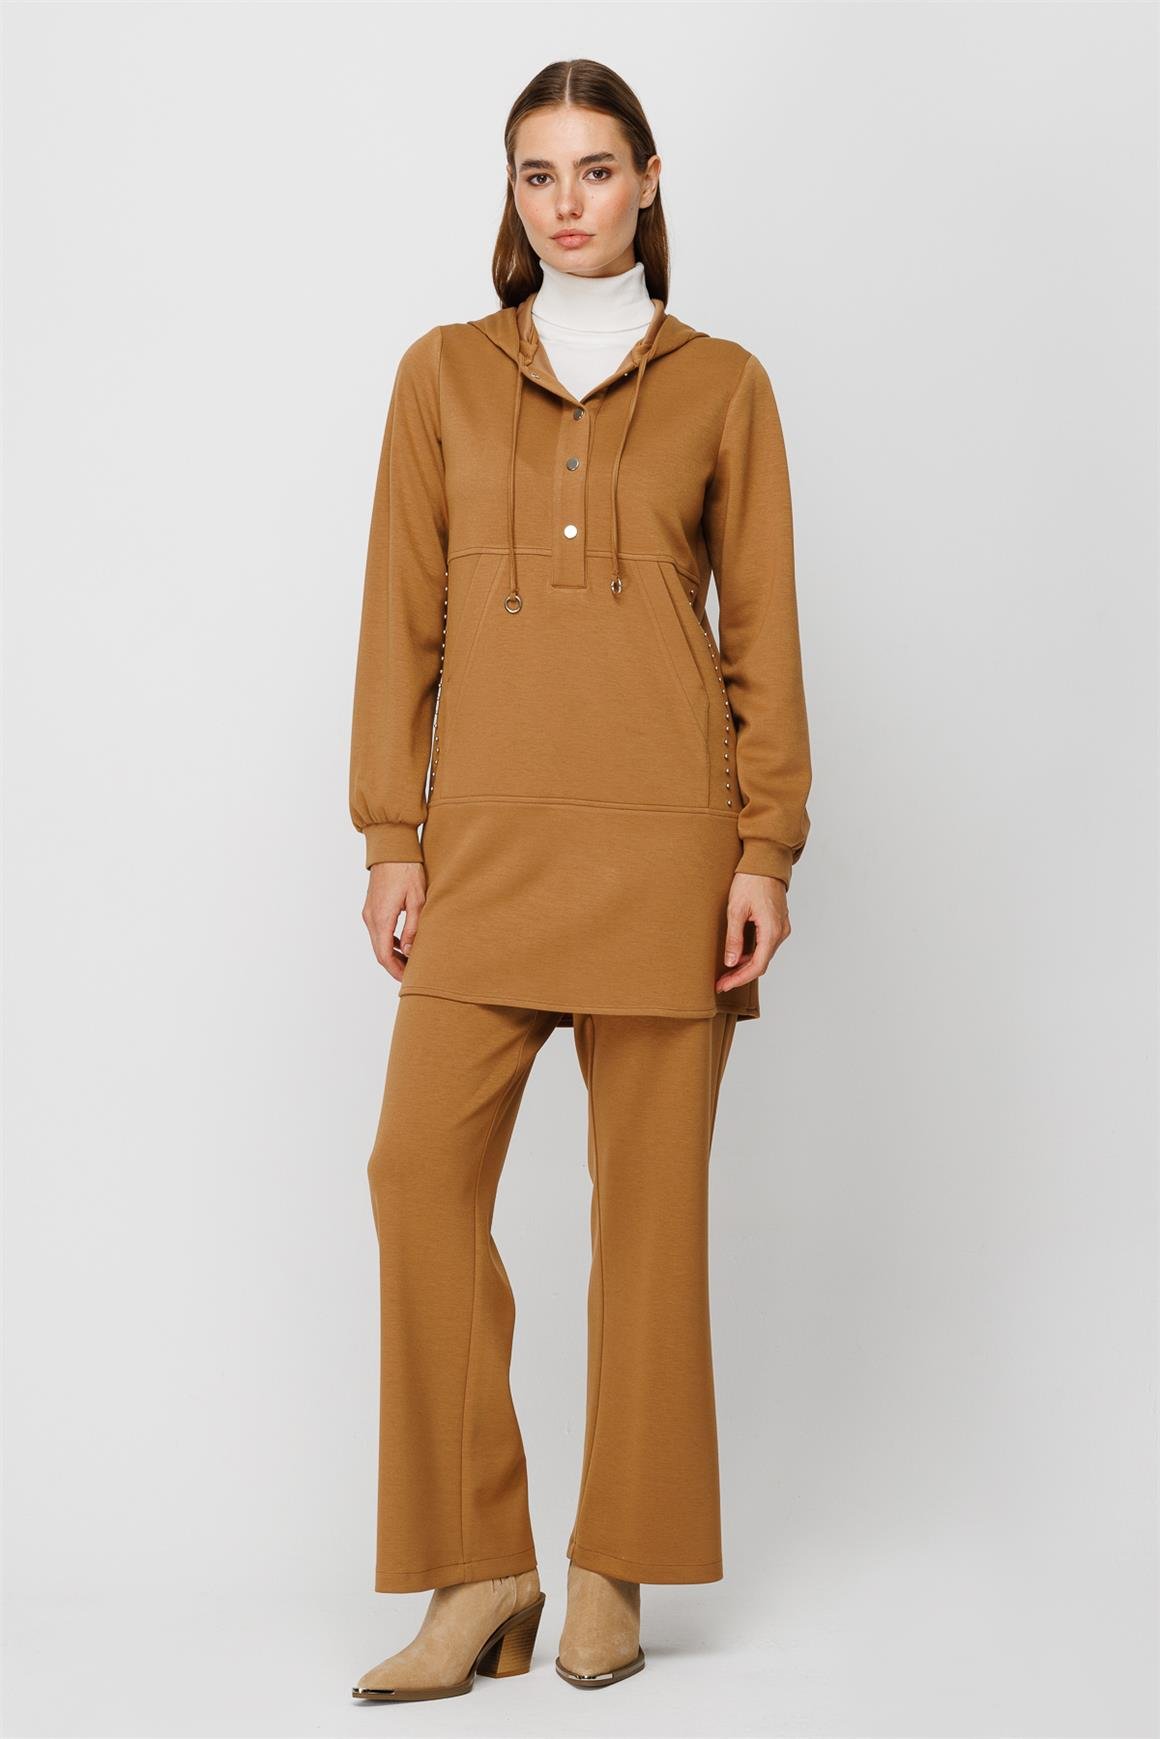 Oysh Fabric Tunic Trousers Set with Hood and Swarows Stone Detail - Camel